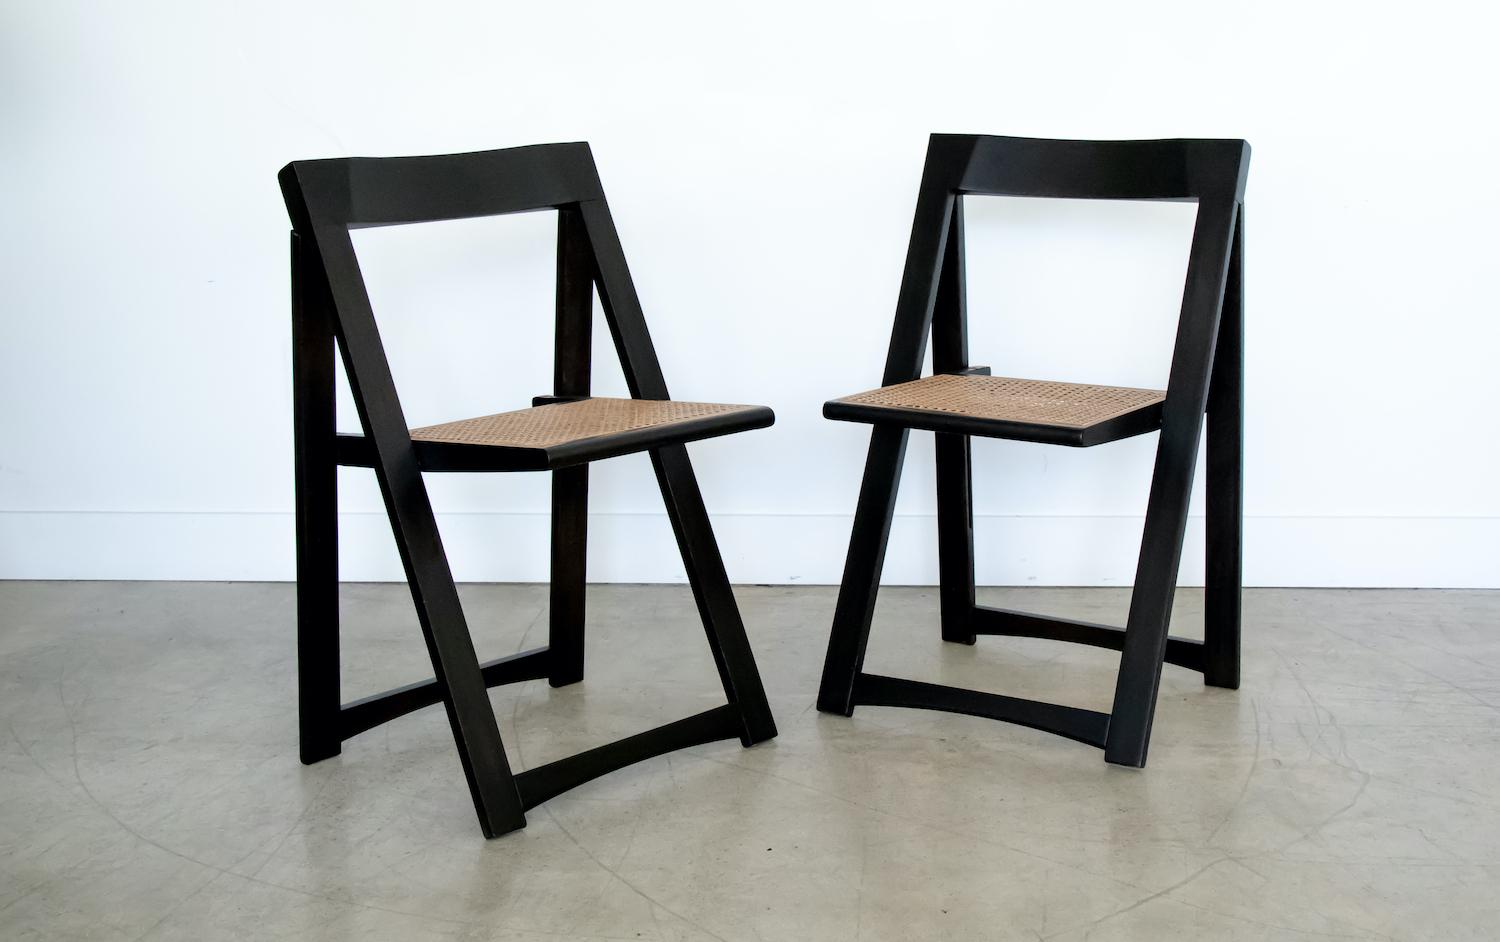 Pair of Italian wood and cane folding chair by Aldo Jacober from Italy, 1960's. Wood has been newly refinished in black, original cane seat. Sold as a set of two. 